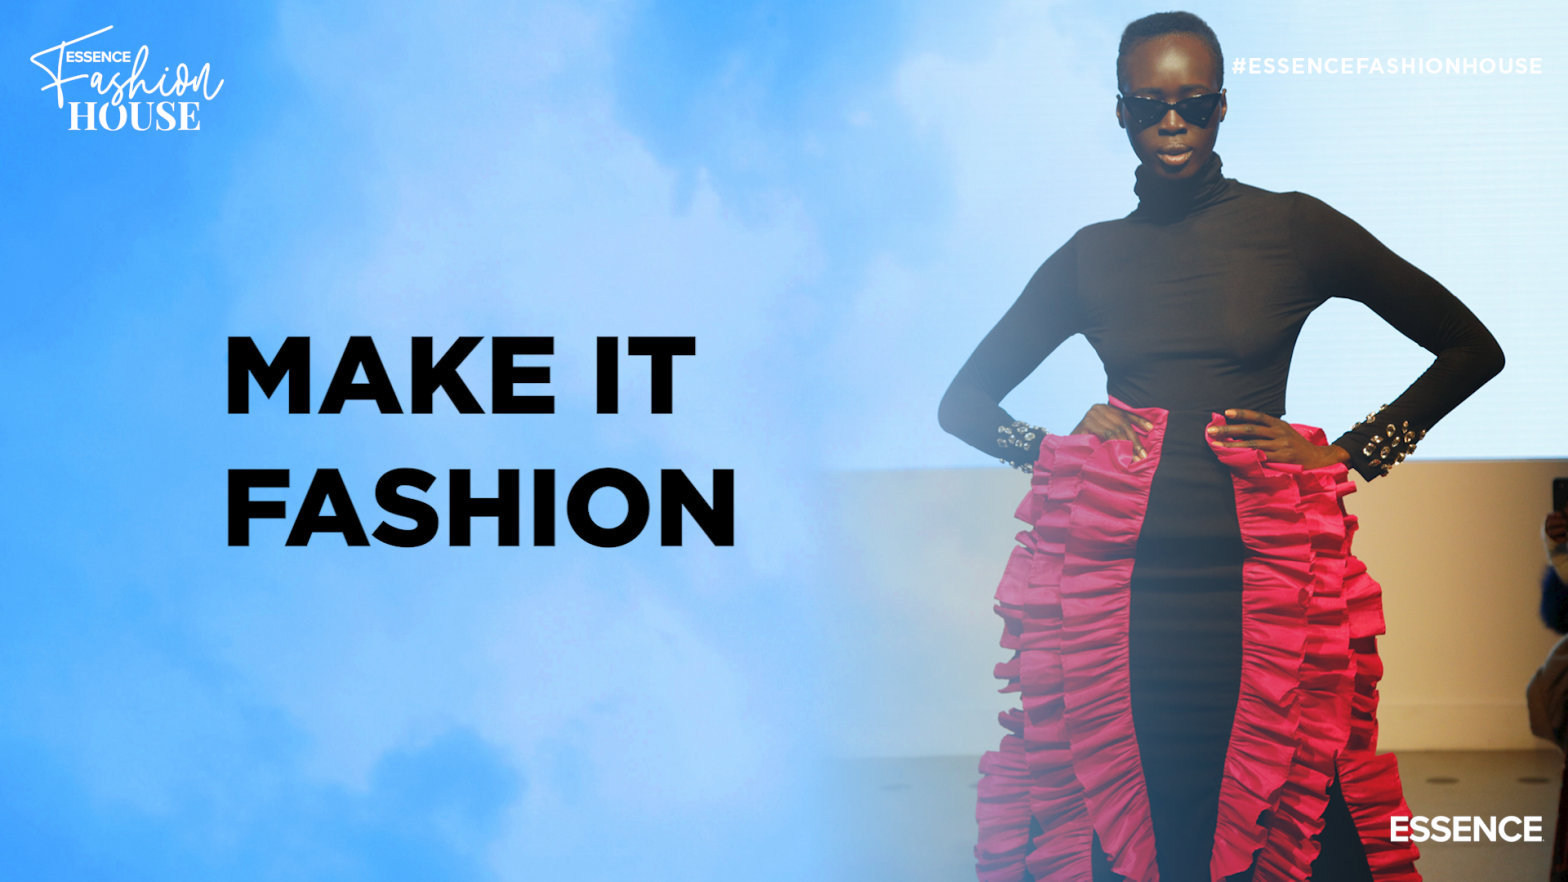 ESSENCE Fashion House Attendees 'Make It Fashion' In New Game